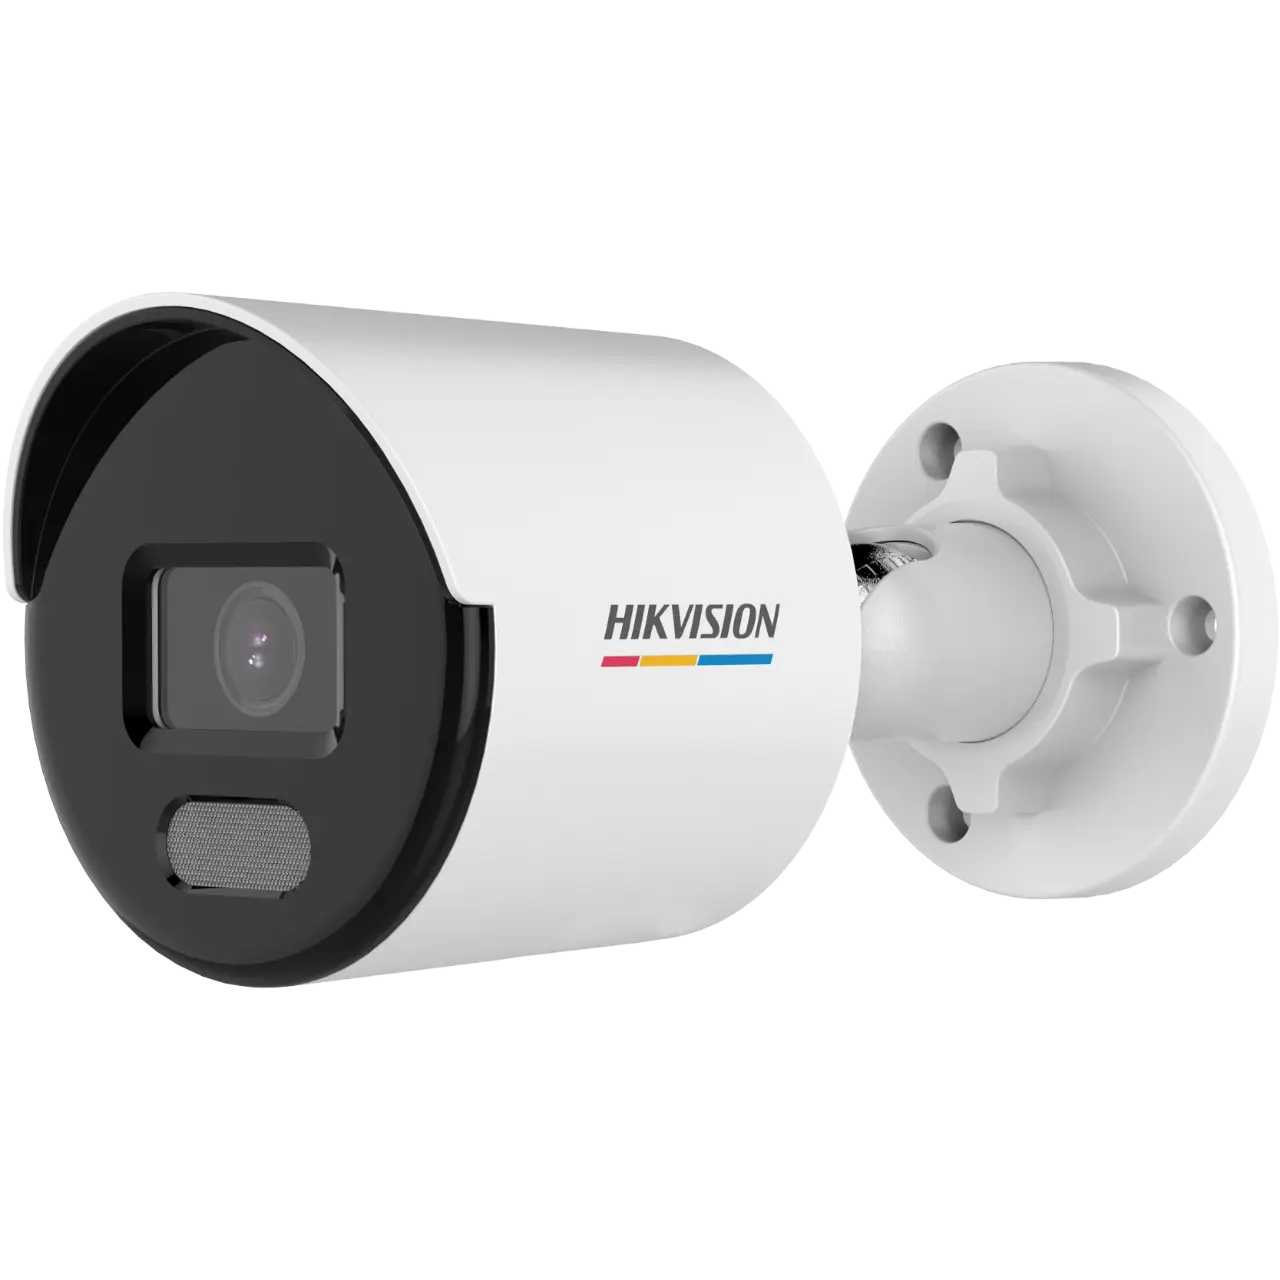 Hikvision DS-2CD1027G0-L(2.8mm)(C)(O-STD) , 2 MP ColorVu Fixed Bullet Network Camera ,High quality imaging with 2 MP resolution